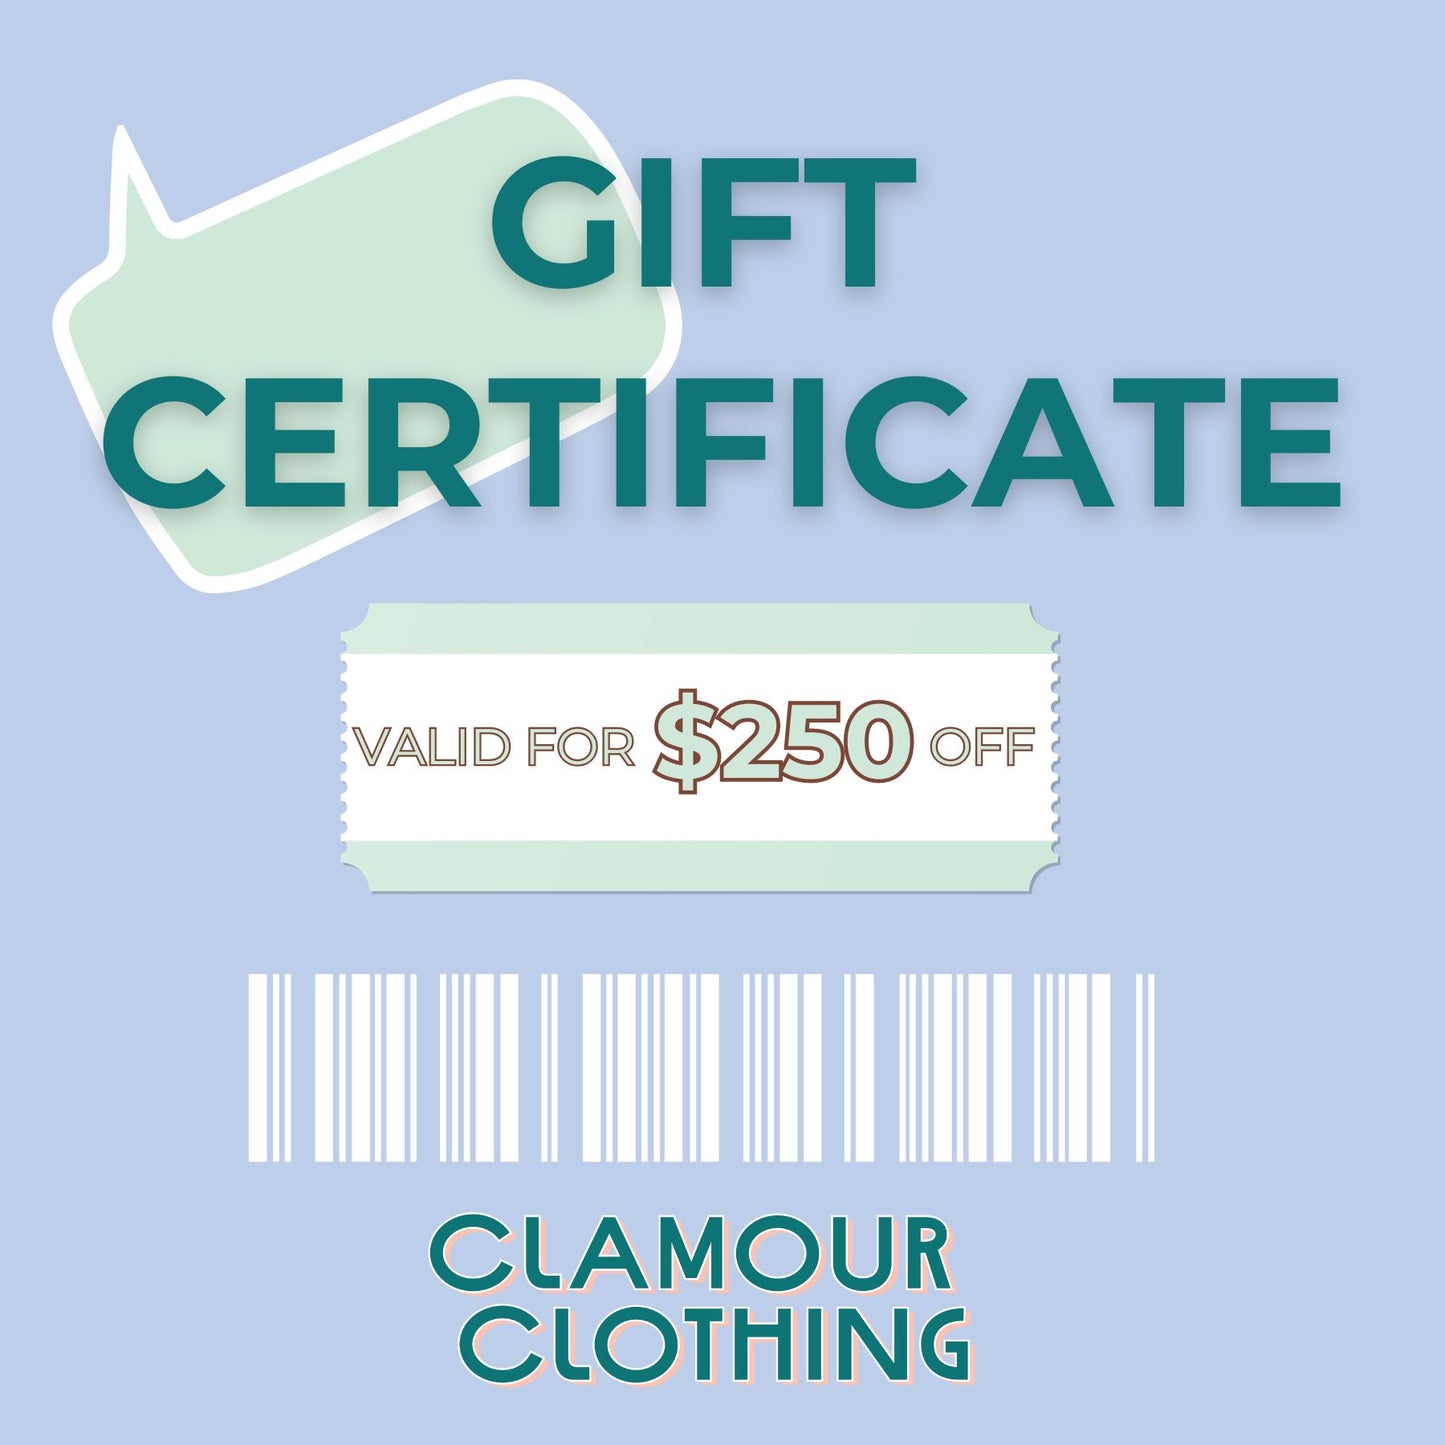 Clamour Clothing Gift Certificate